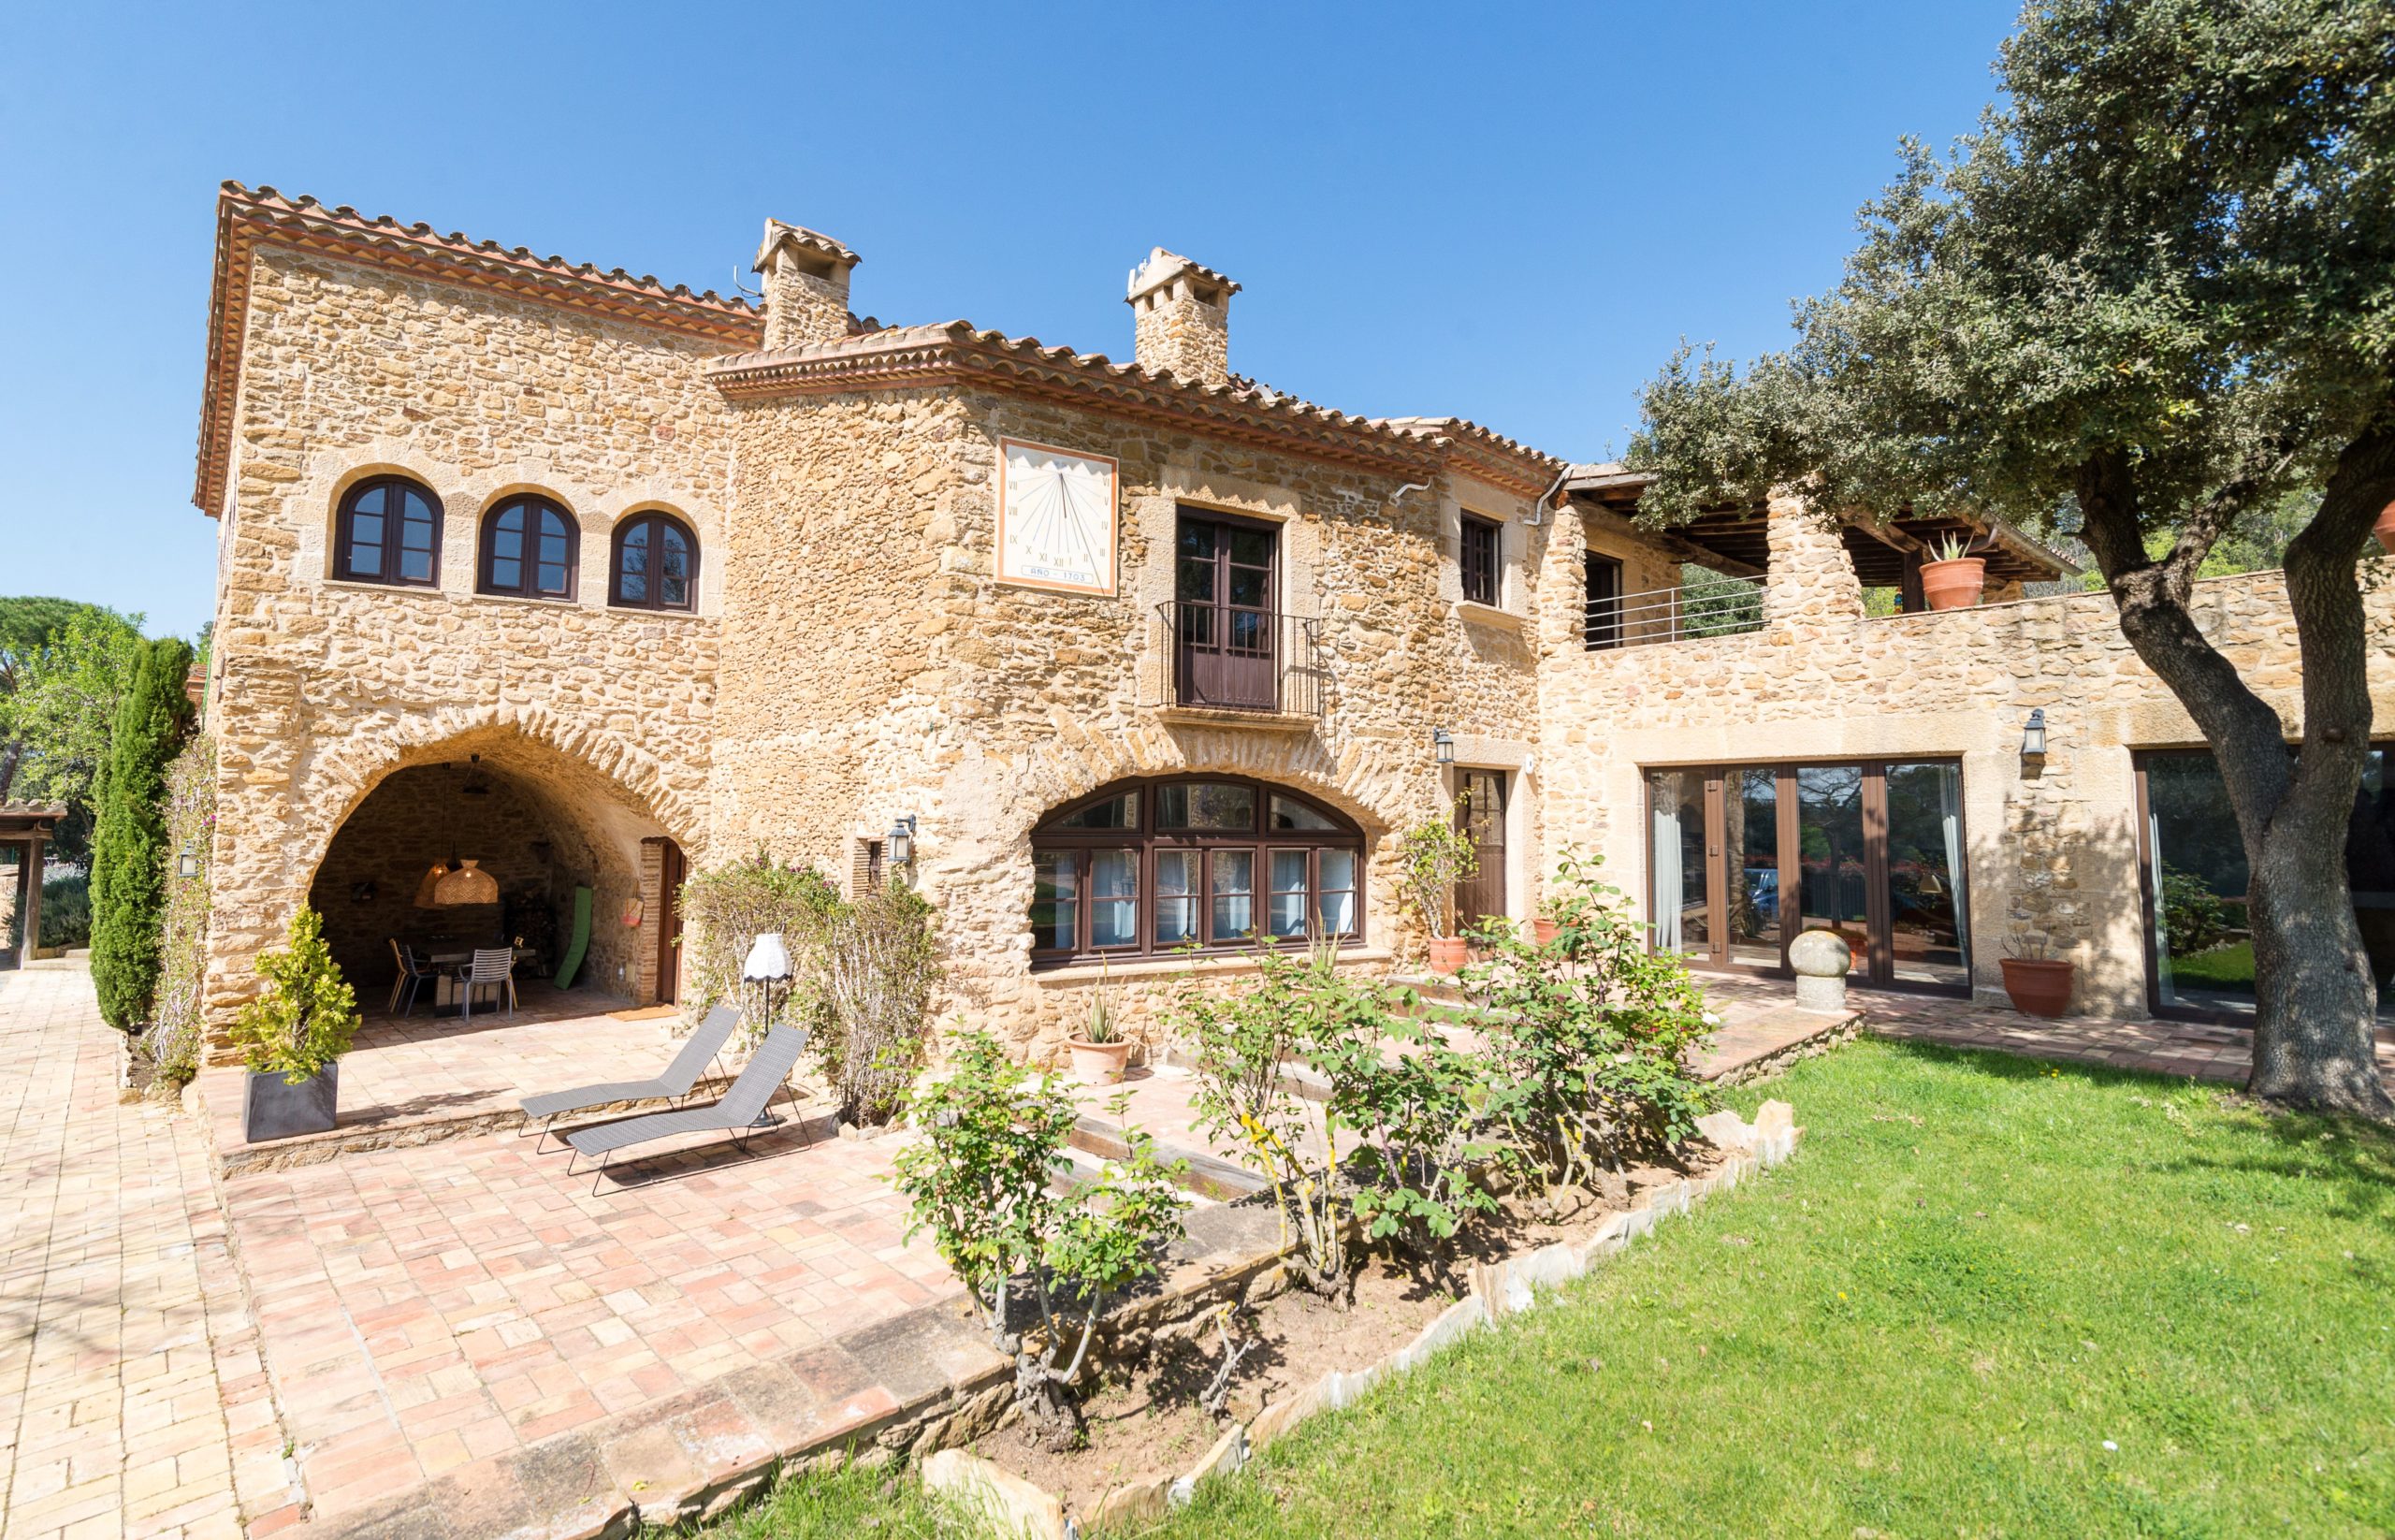 SPECTACULAR STONE VILLA WITH GARDEN AND PRIVATE POOL - smilinghouse.ch